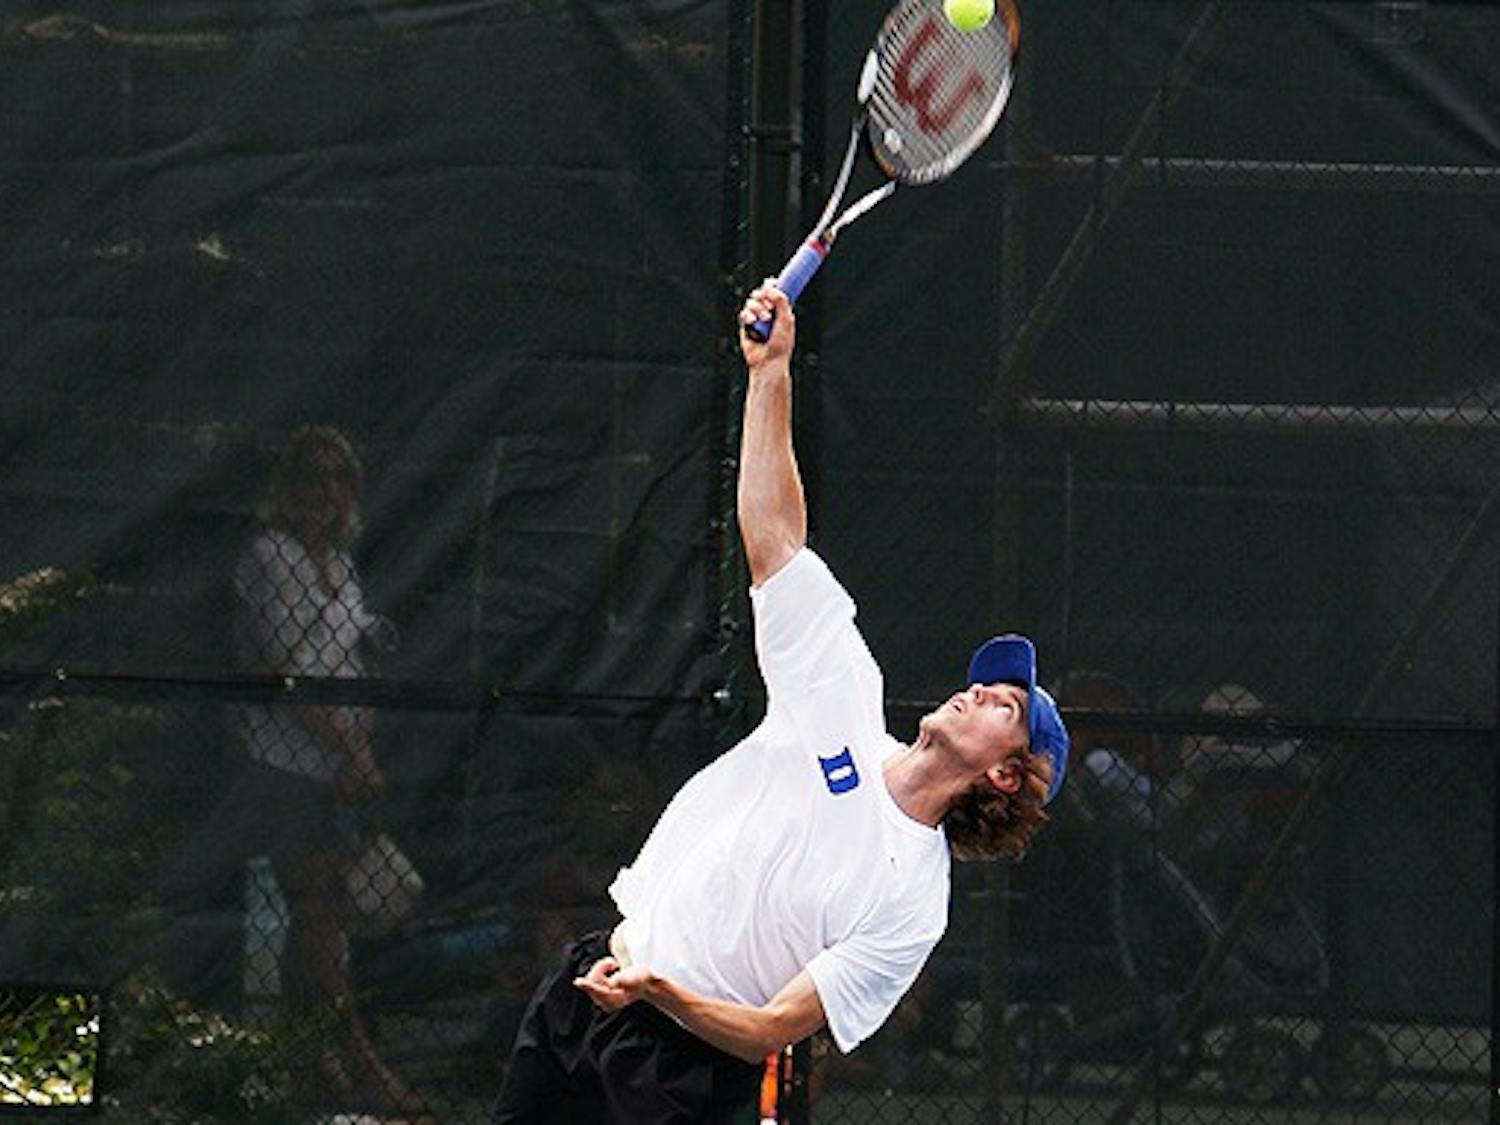 Junior Reid Carleton, one-half of the best doubles team in the country, couldn’t stop Virginia Friday.